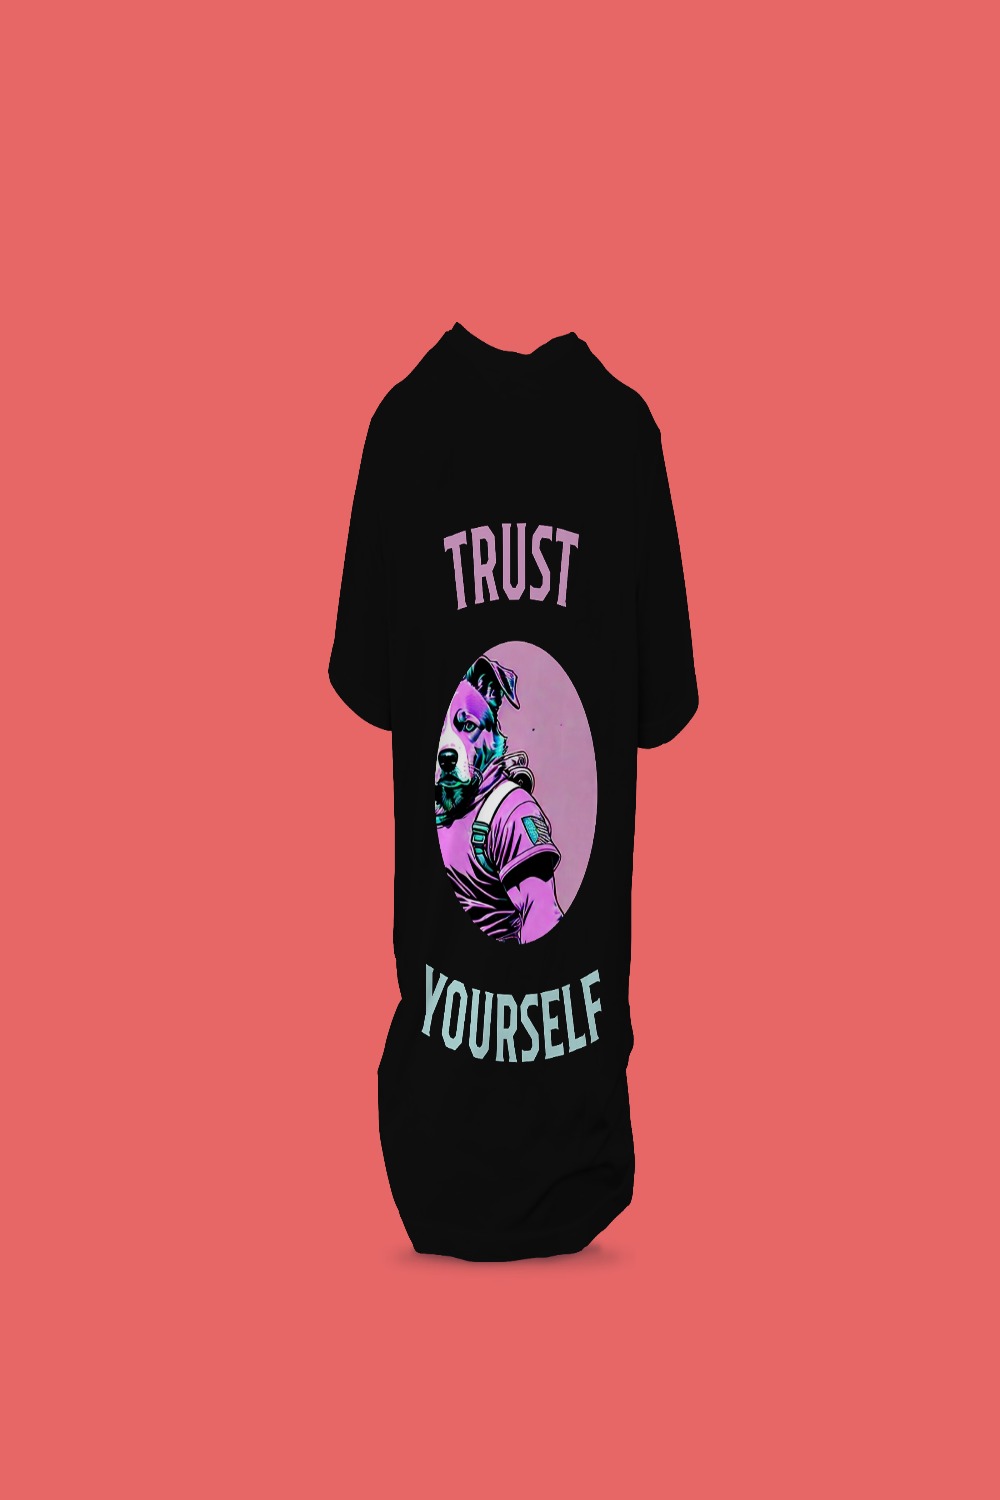 TRUST YOURSELF - T-SHIRT DESIGN pinterest preview image.